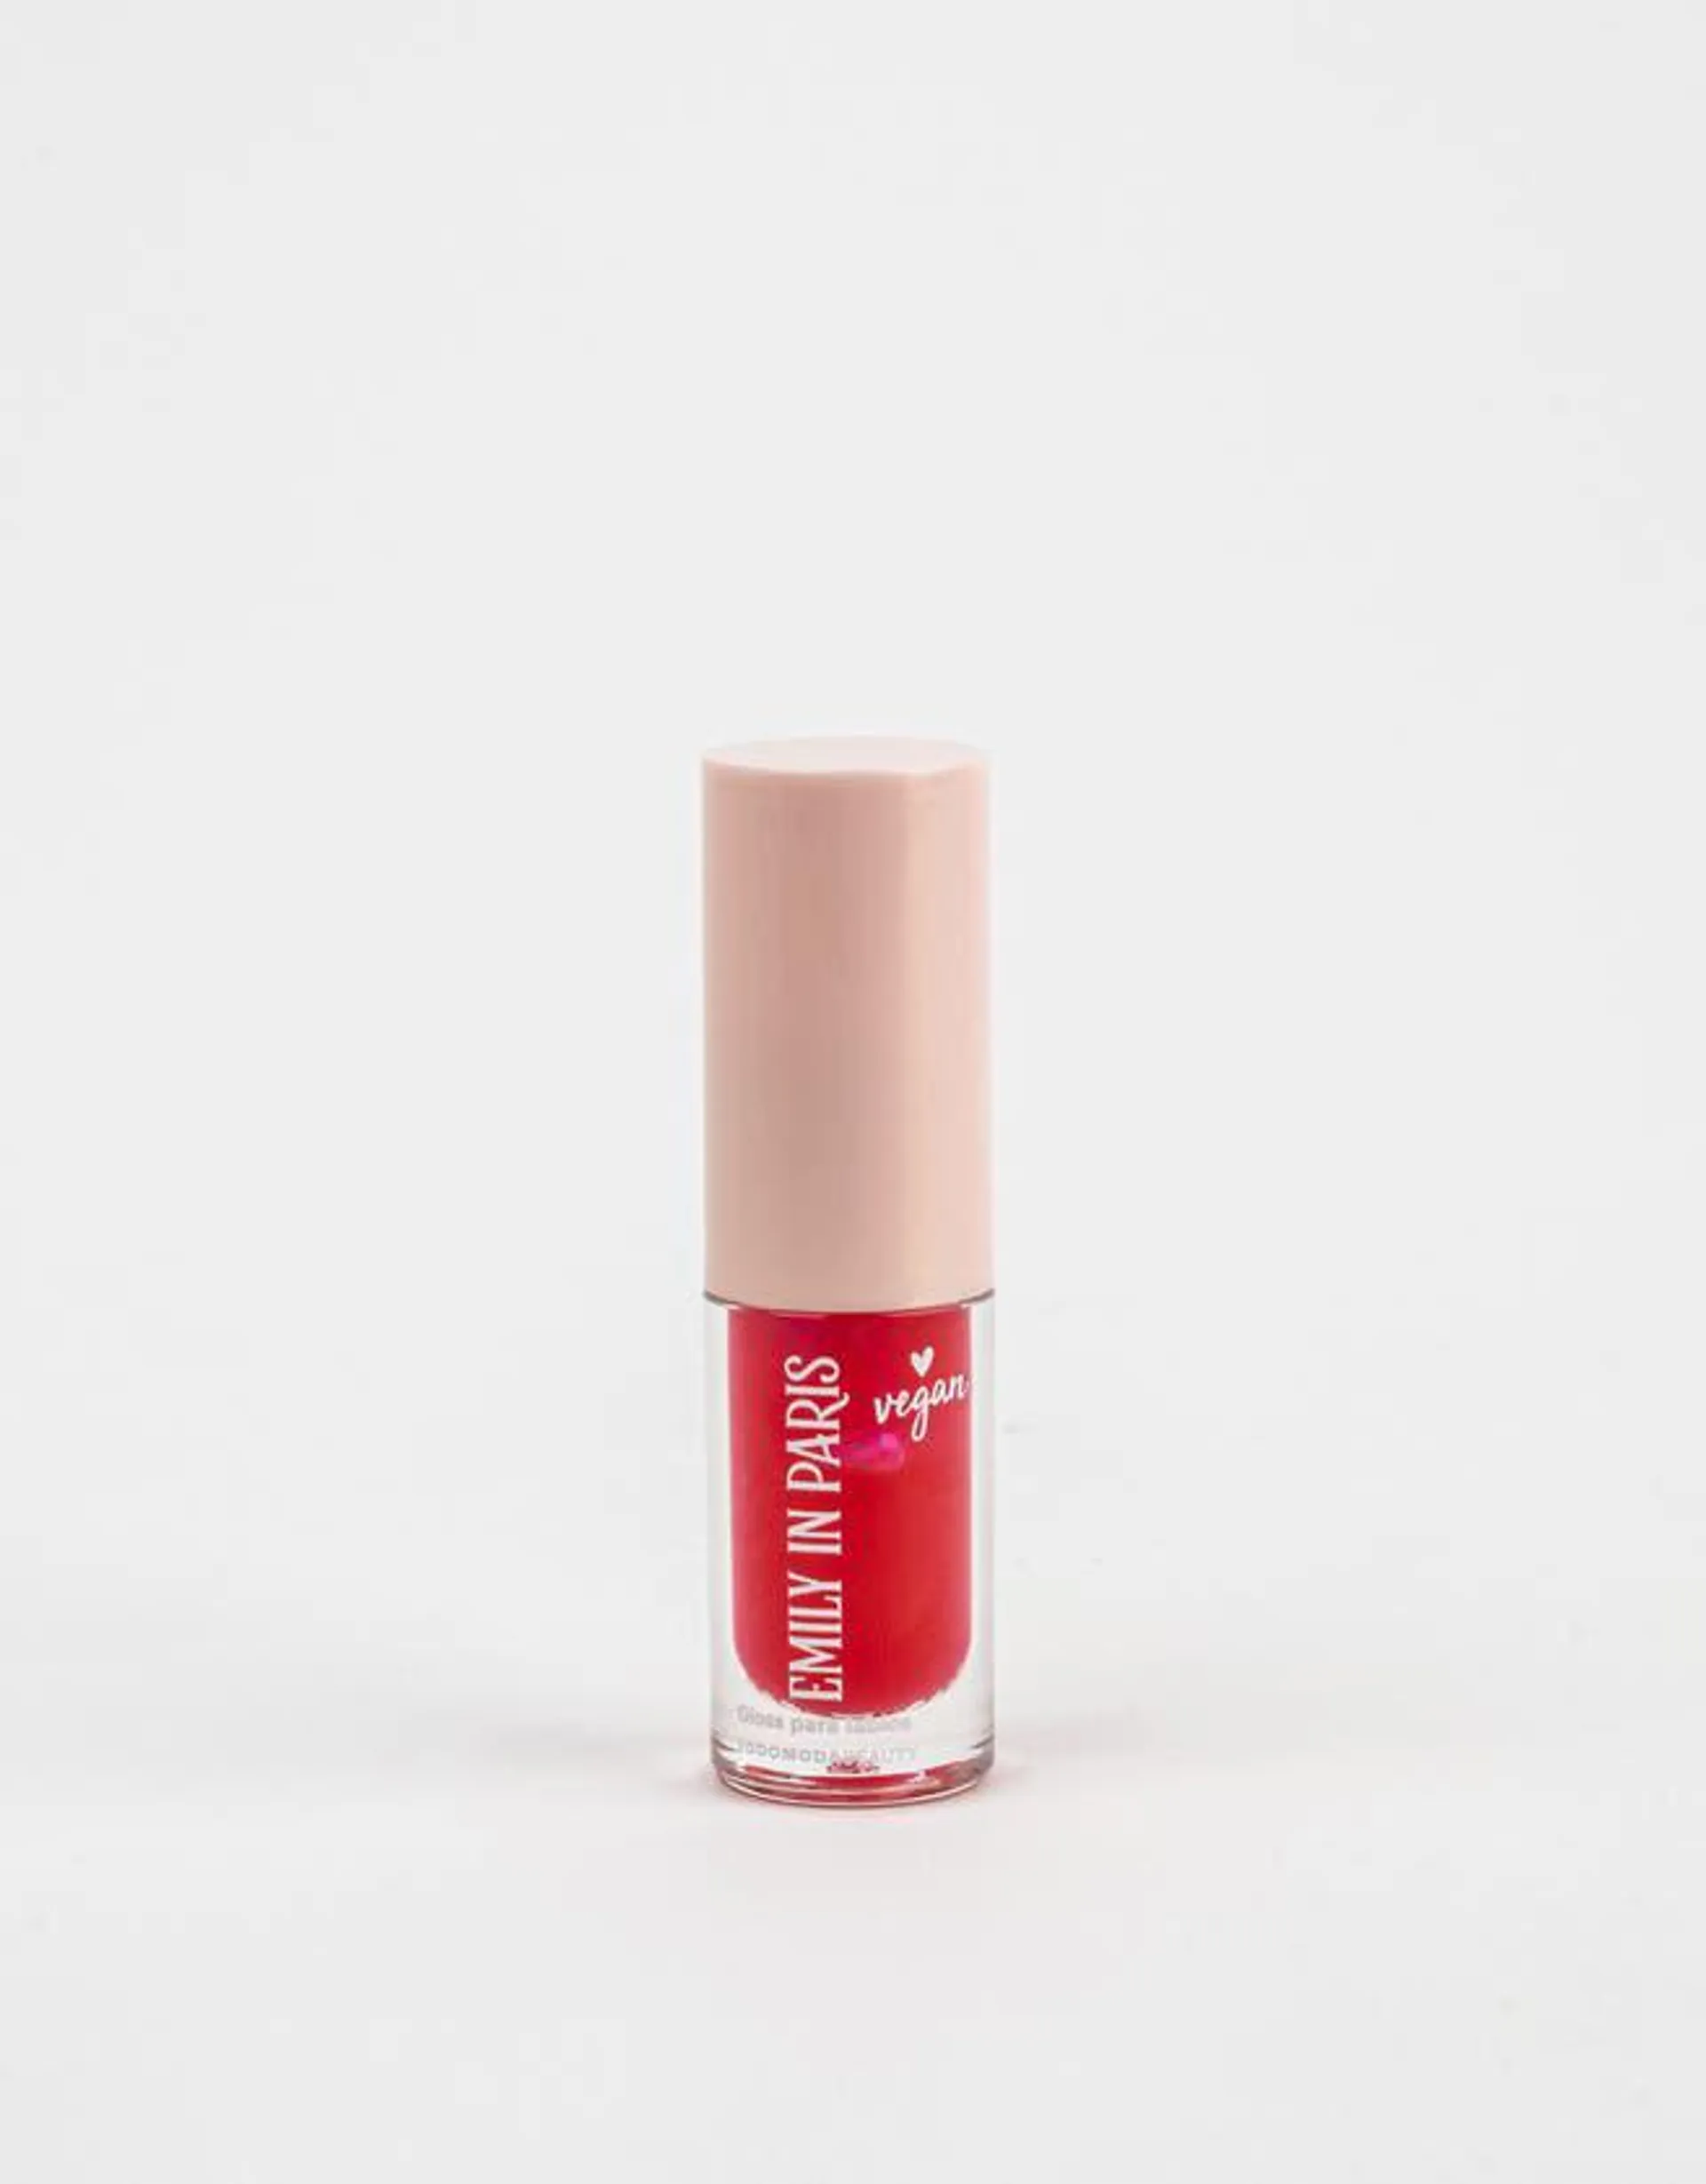 Gloss labial "emily in paris" - french class